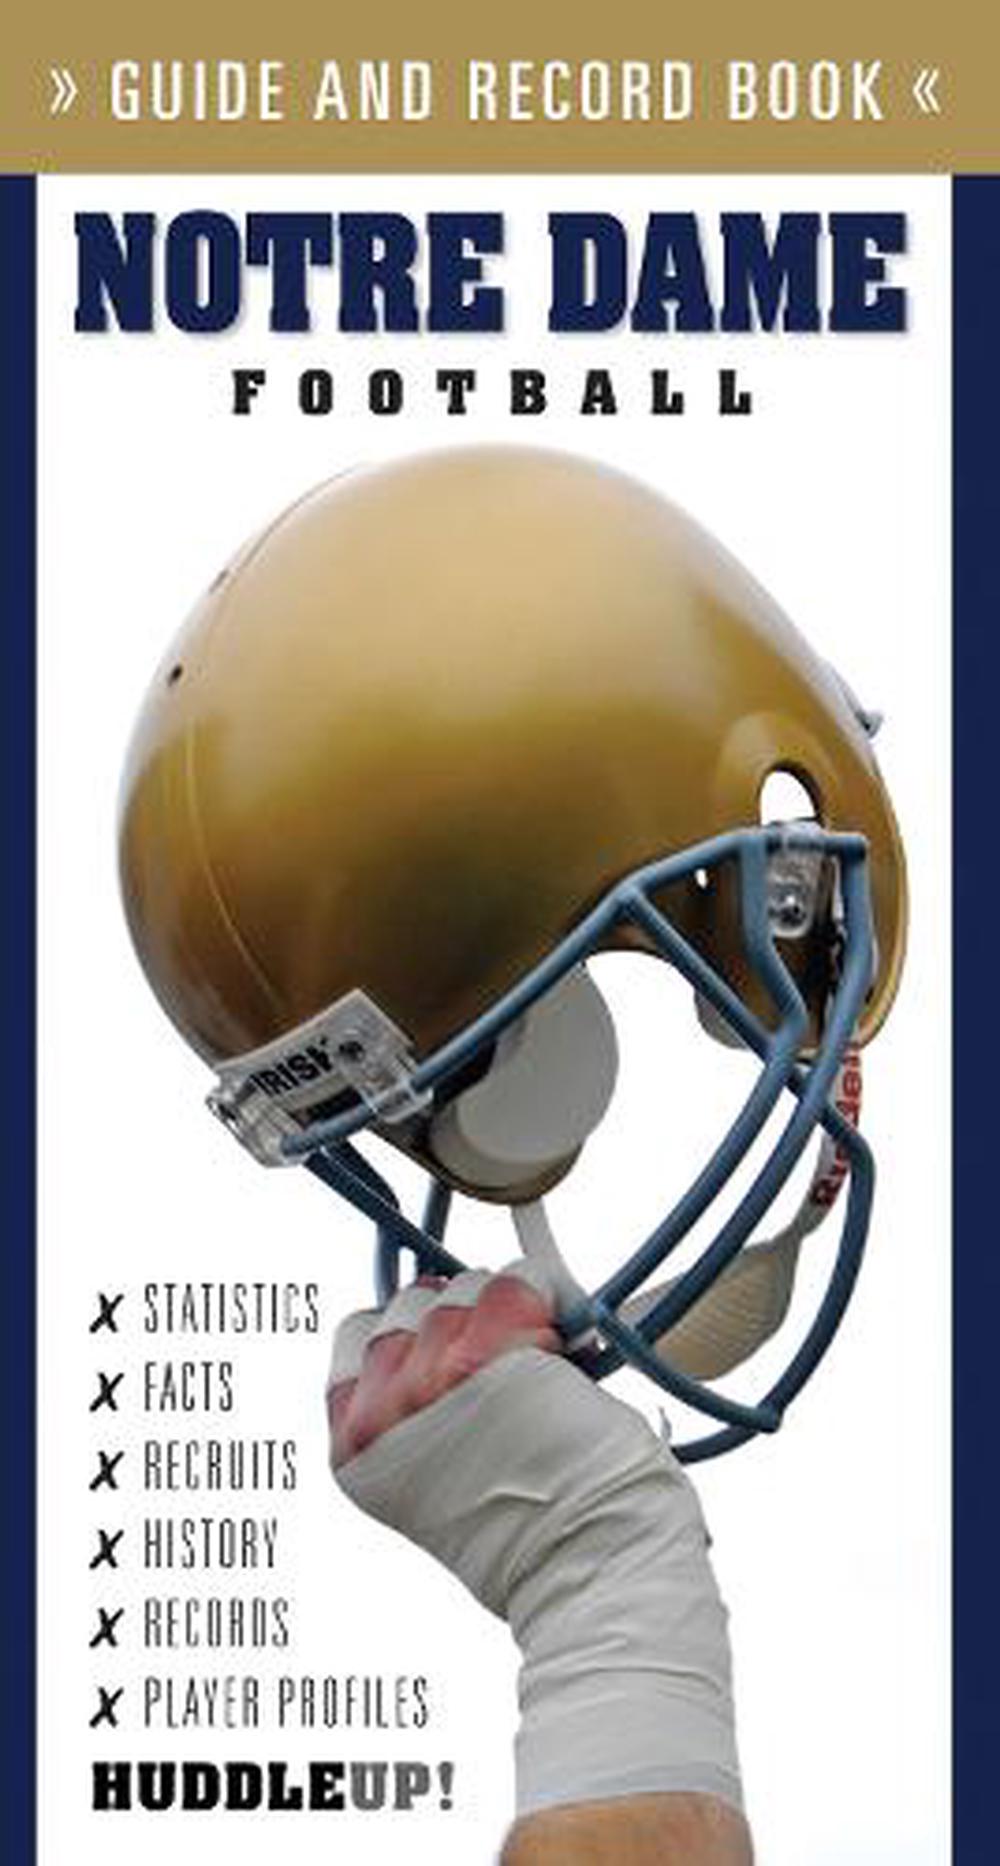 Notre Dame Football Guide and Record Book Guide & Record Book by Christopher W 9781600781827